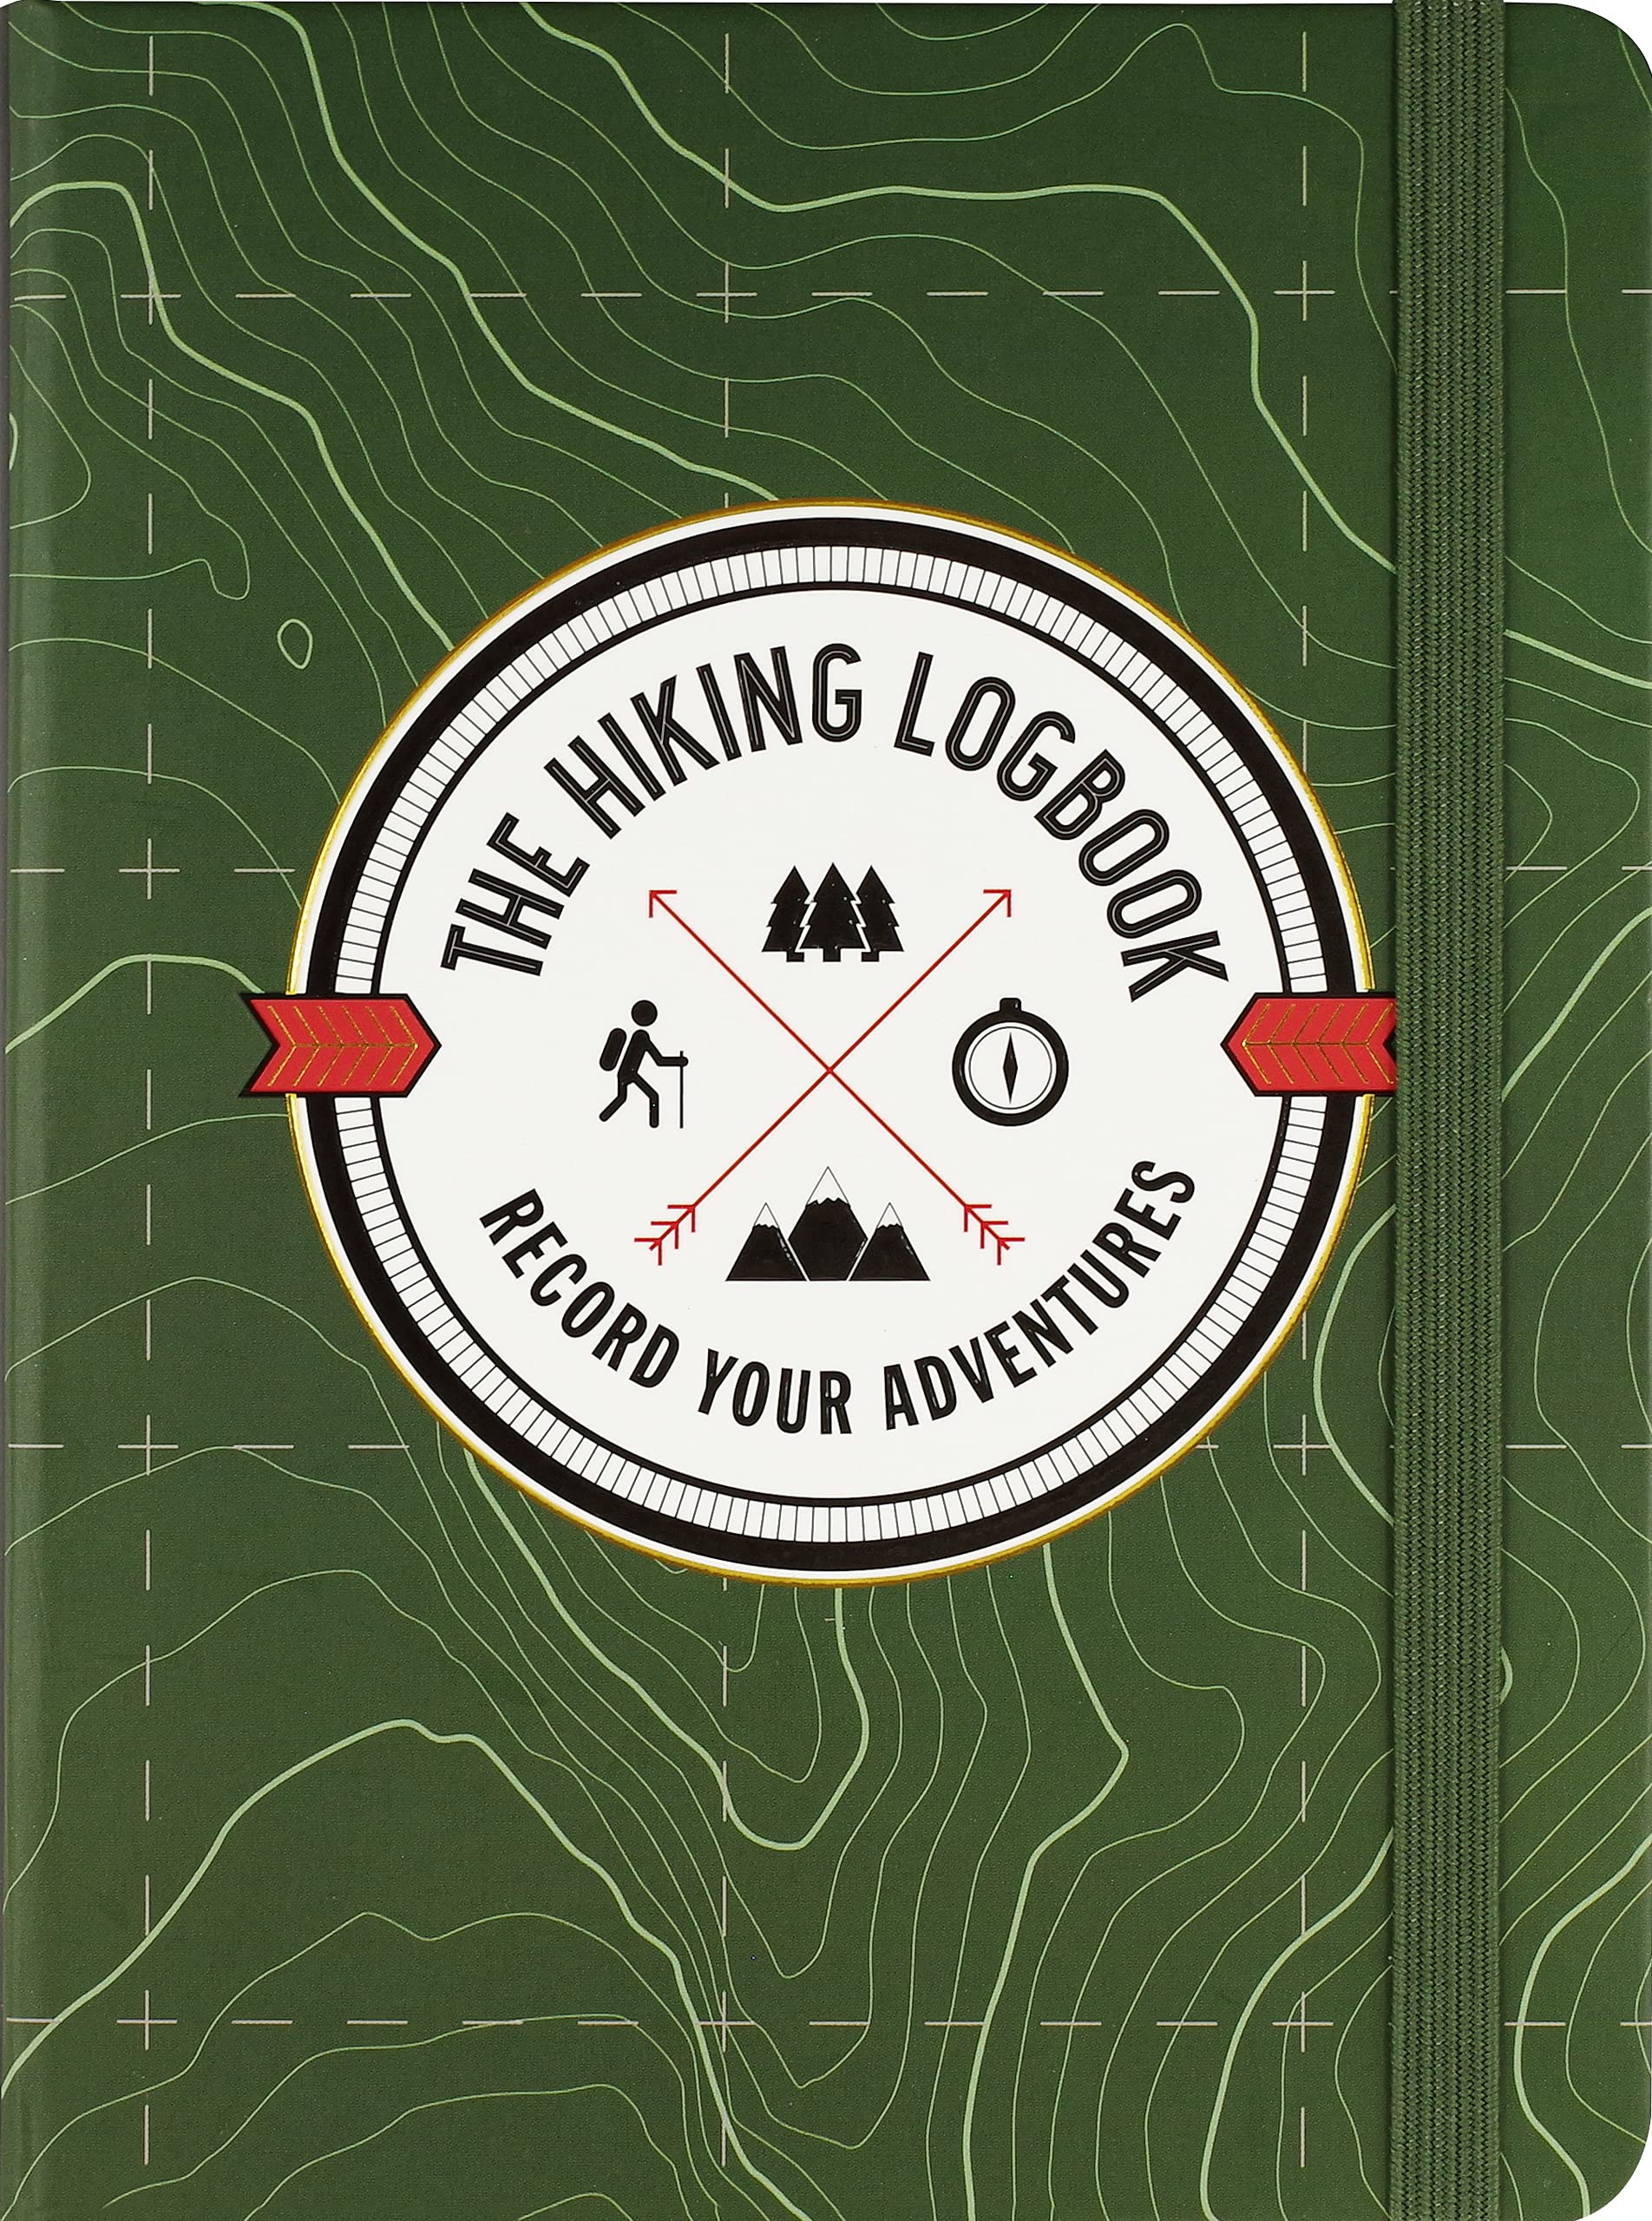 front cover of hiking logbook is green with geographical lines, a white center patch filled with title, and green elastic strap closure